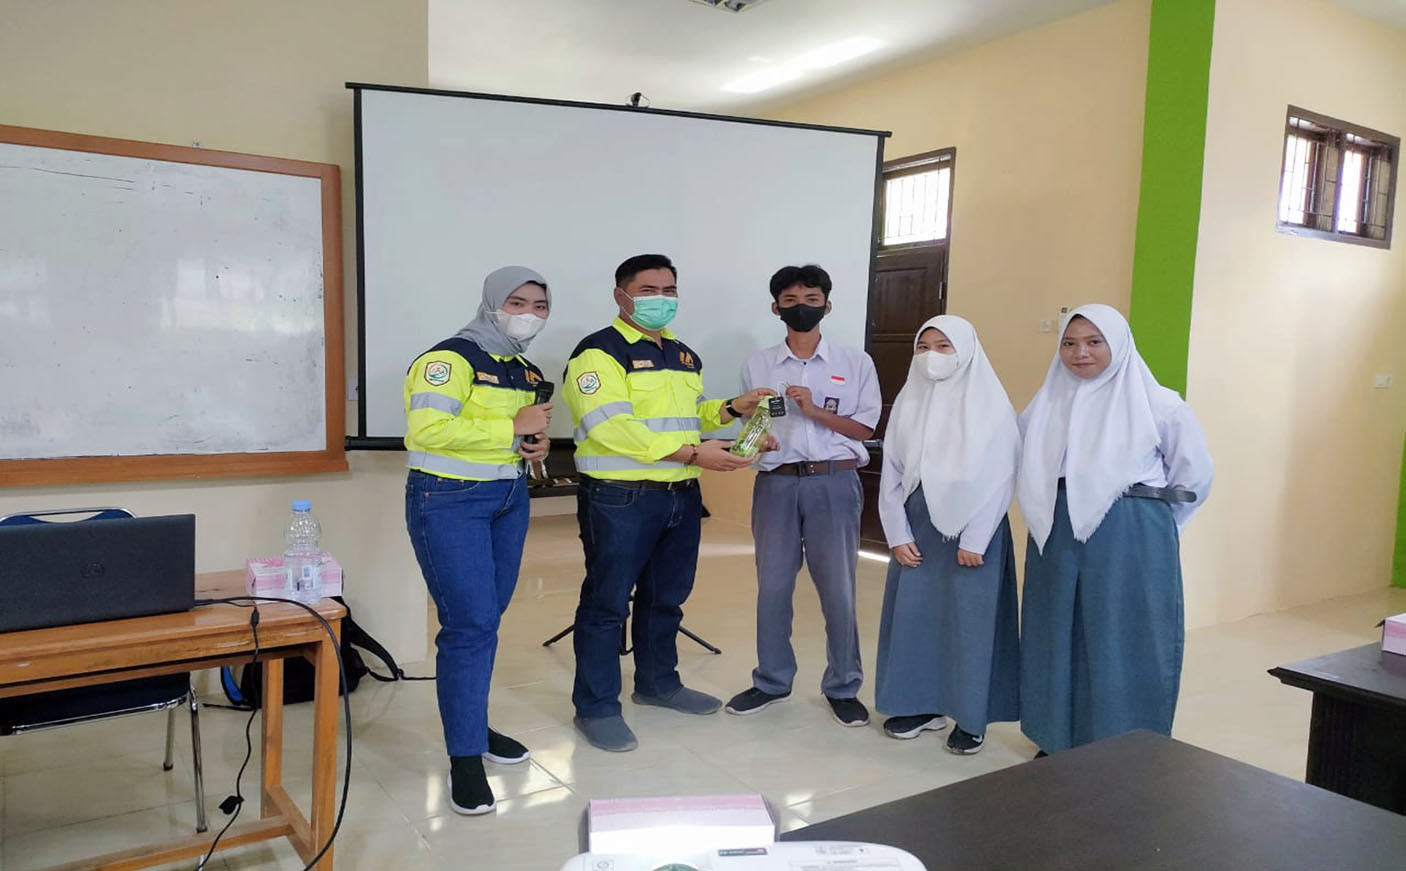 MDA Gives Public Lecture at SMKN 2 Luwu on OHS